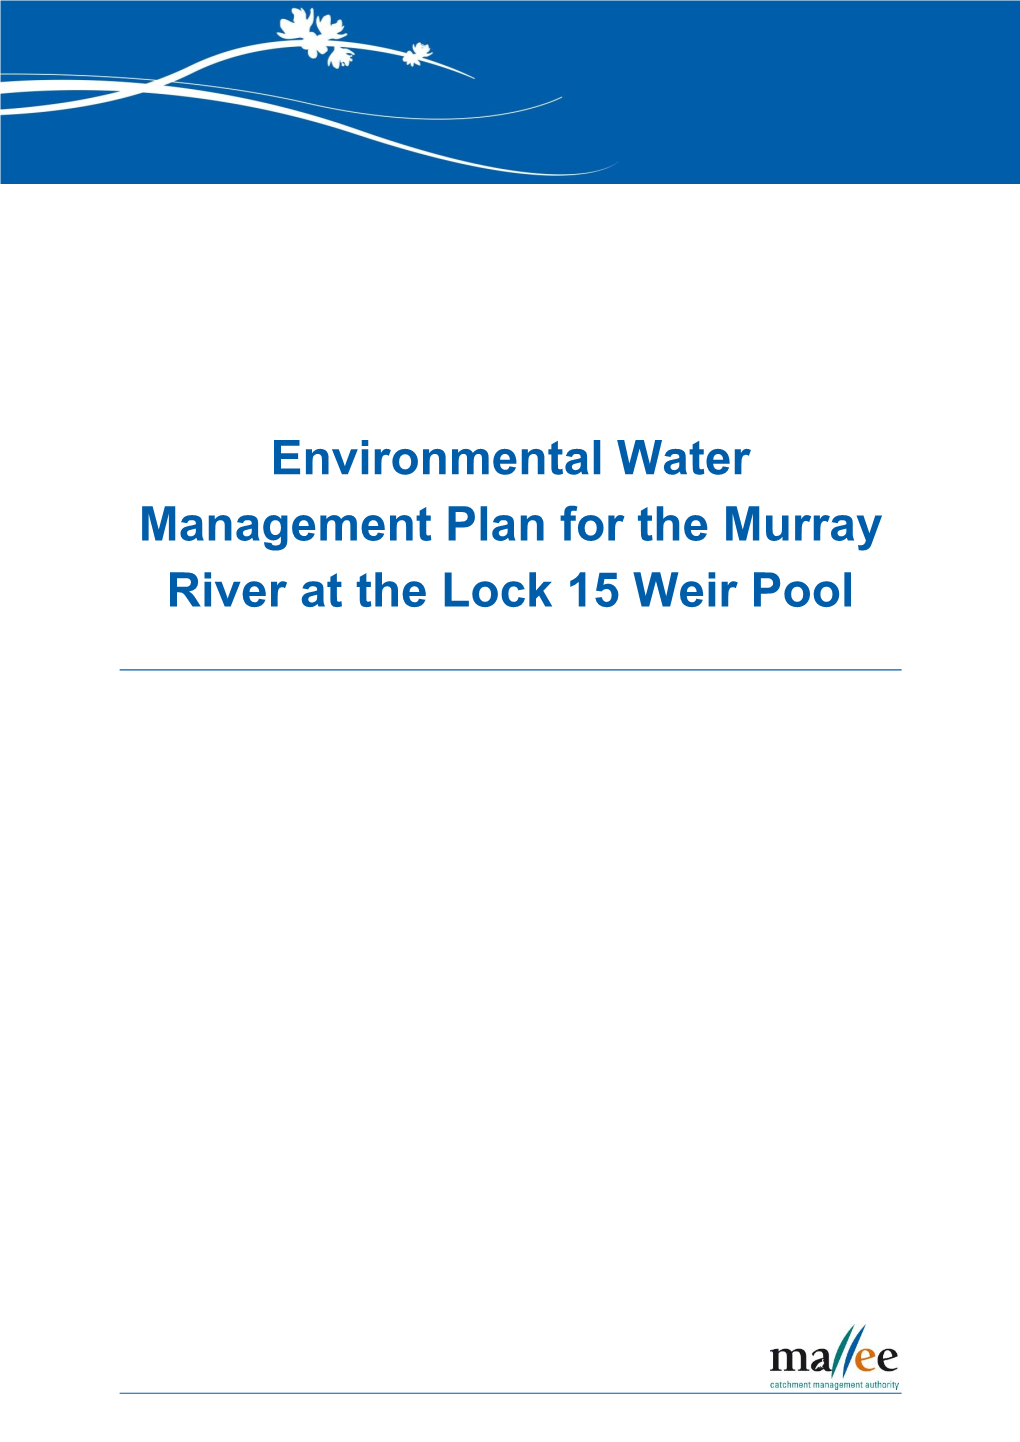 Environmental Water Management Plan for the Murray River at the Lock 15 Weir Pool